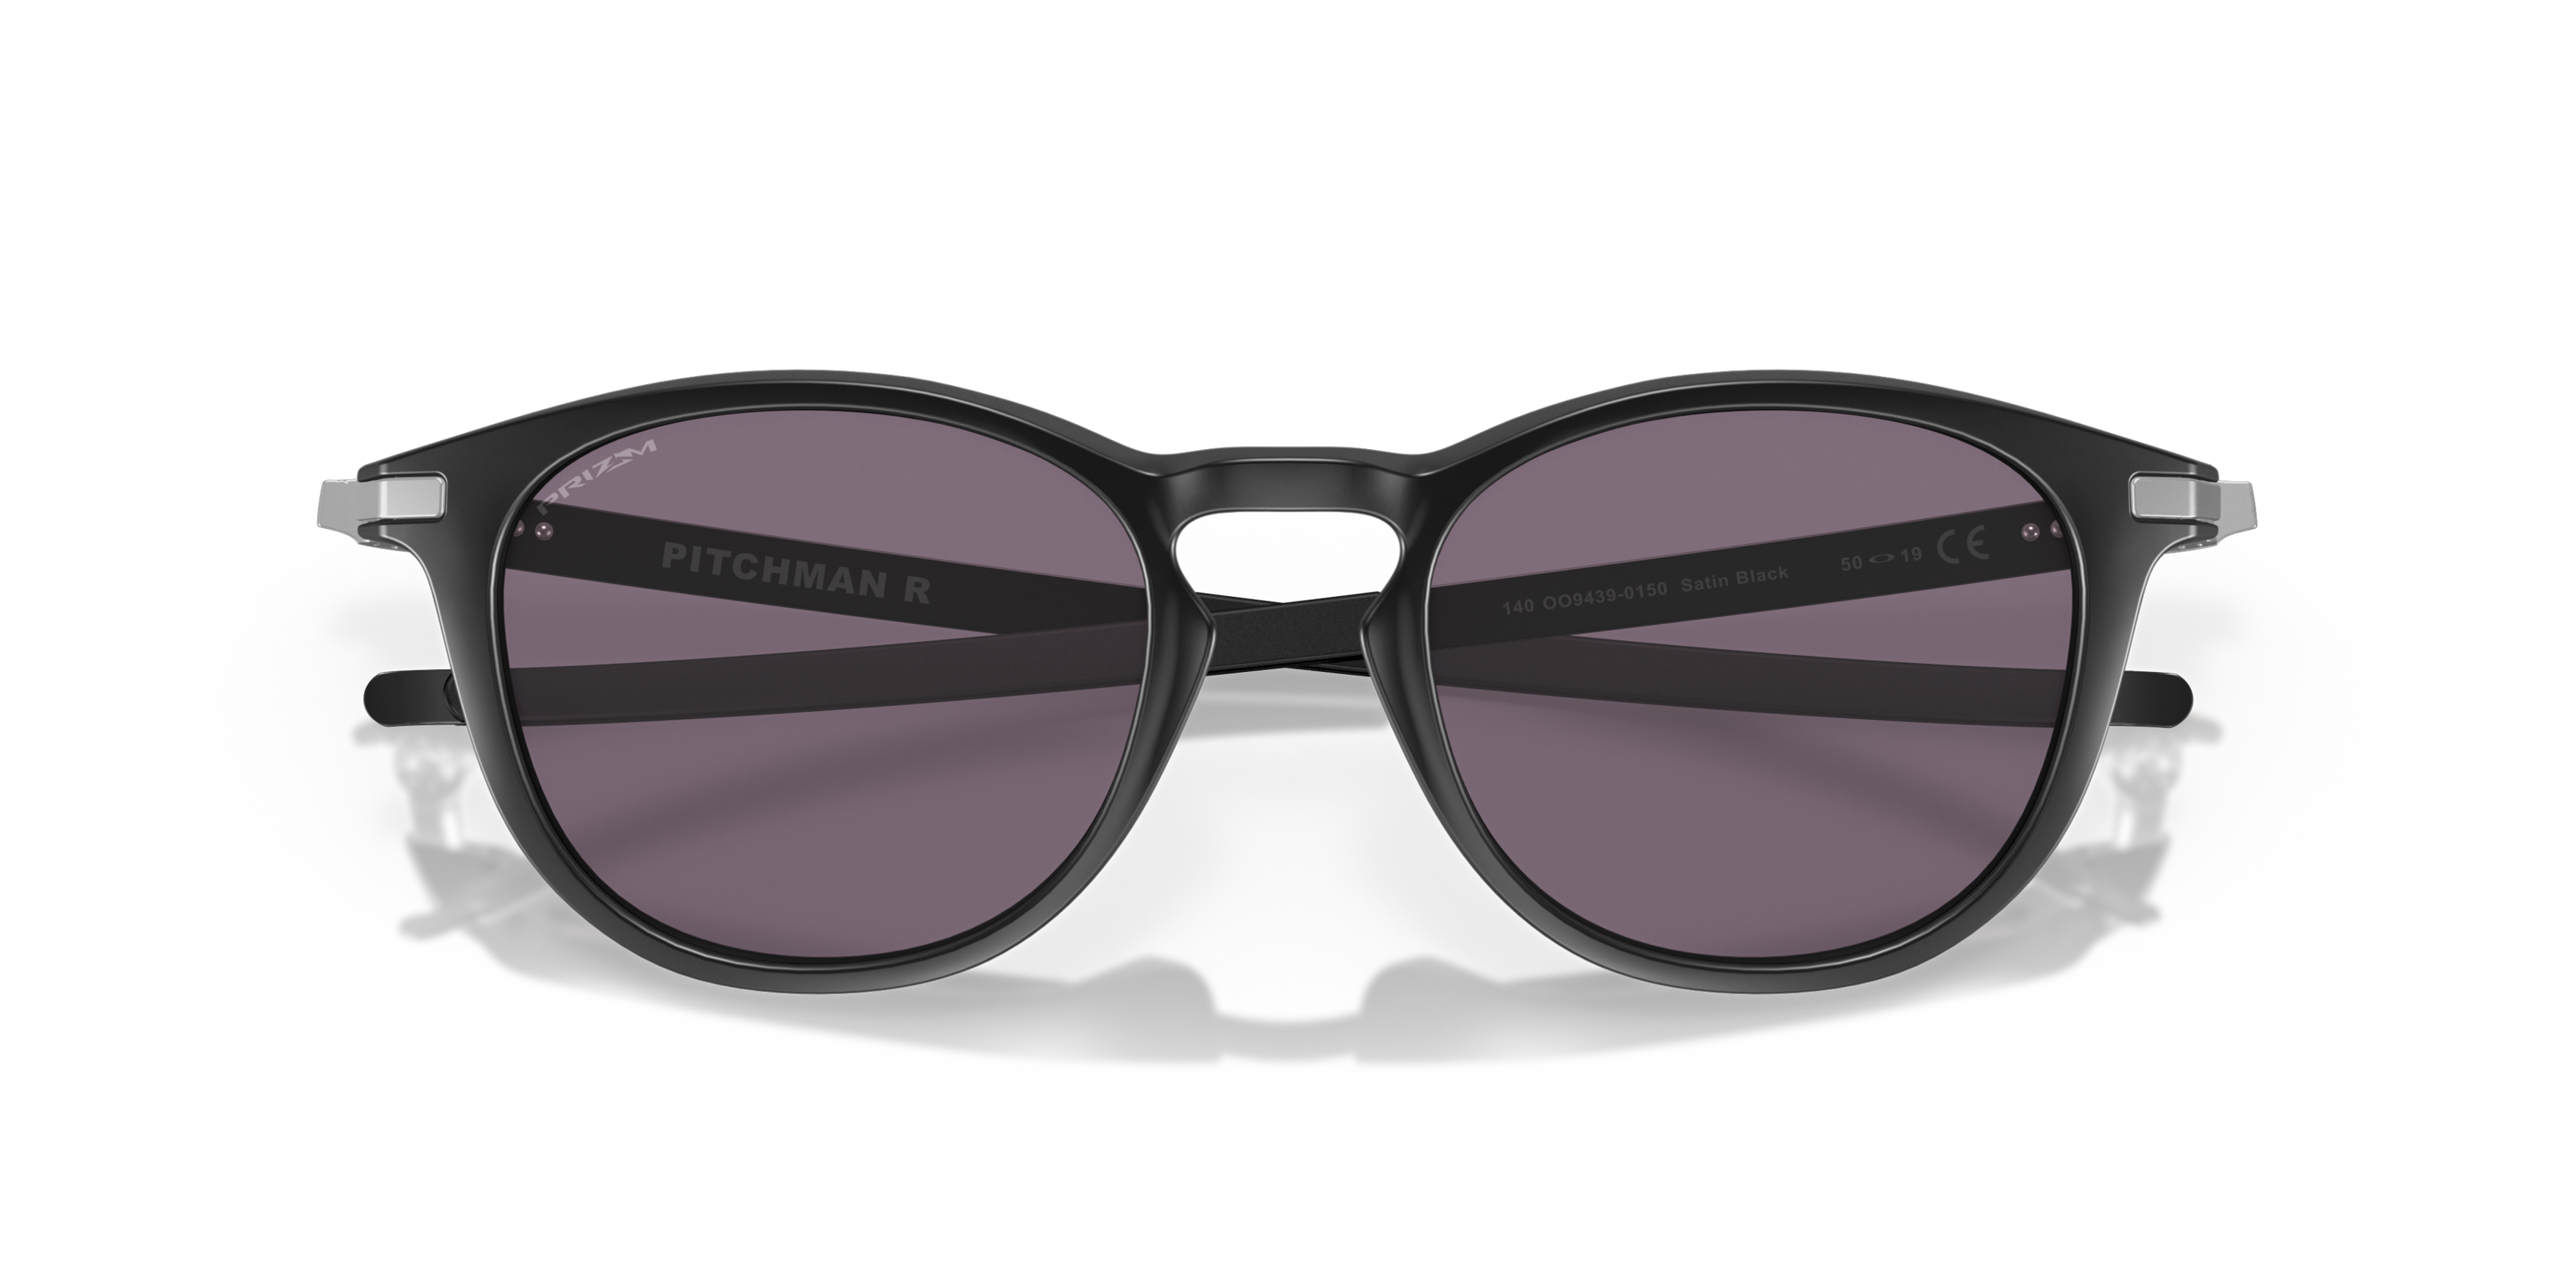 [products.image.folded] Oakley OO9439 943901